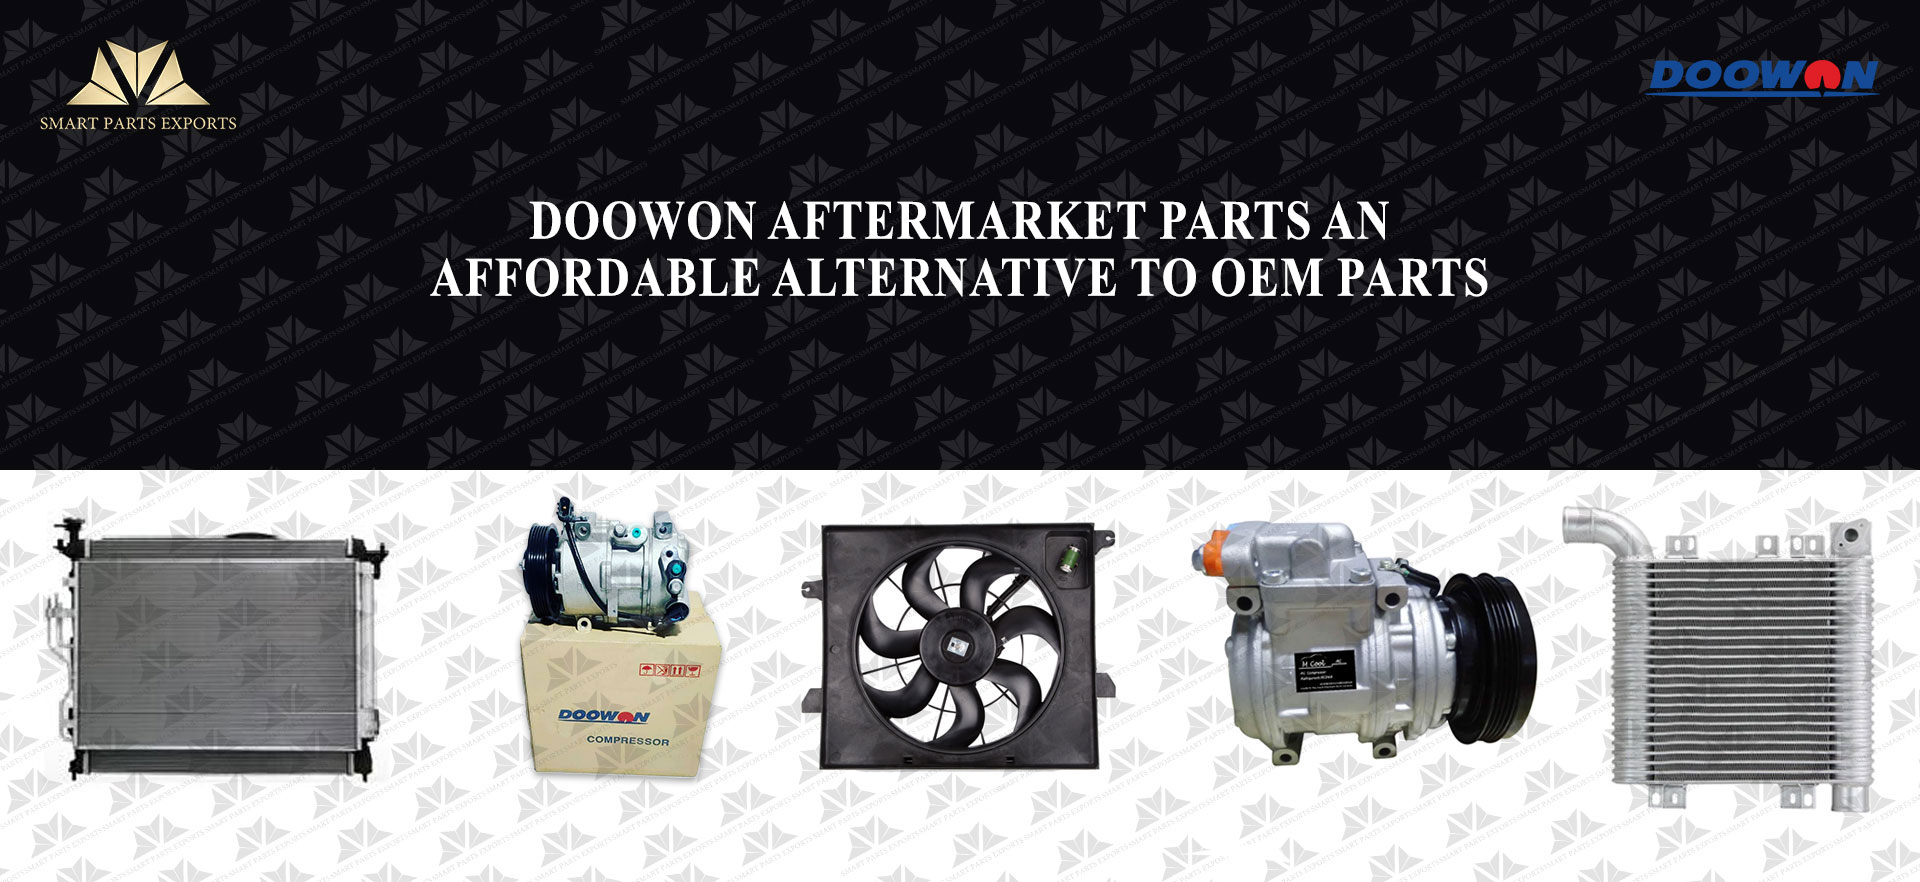 Doowon Aftermarket Parts - An Affordable Alternative to OEM Parts